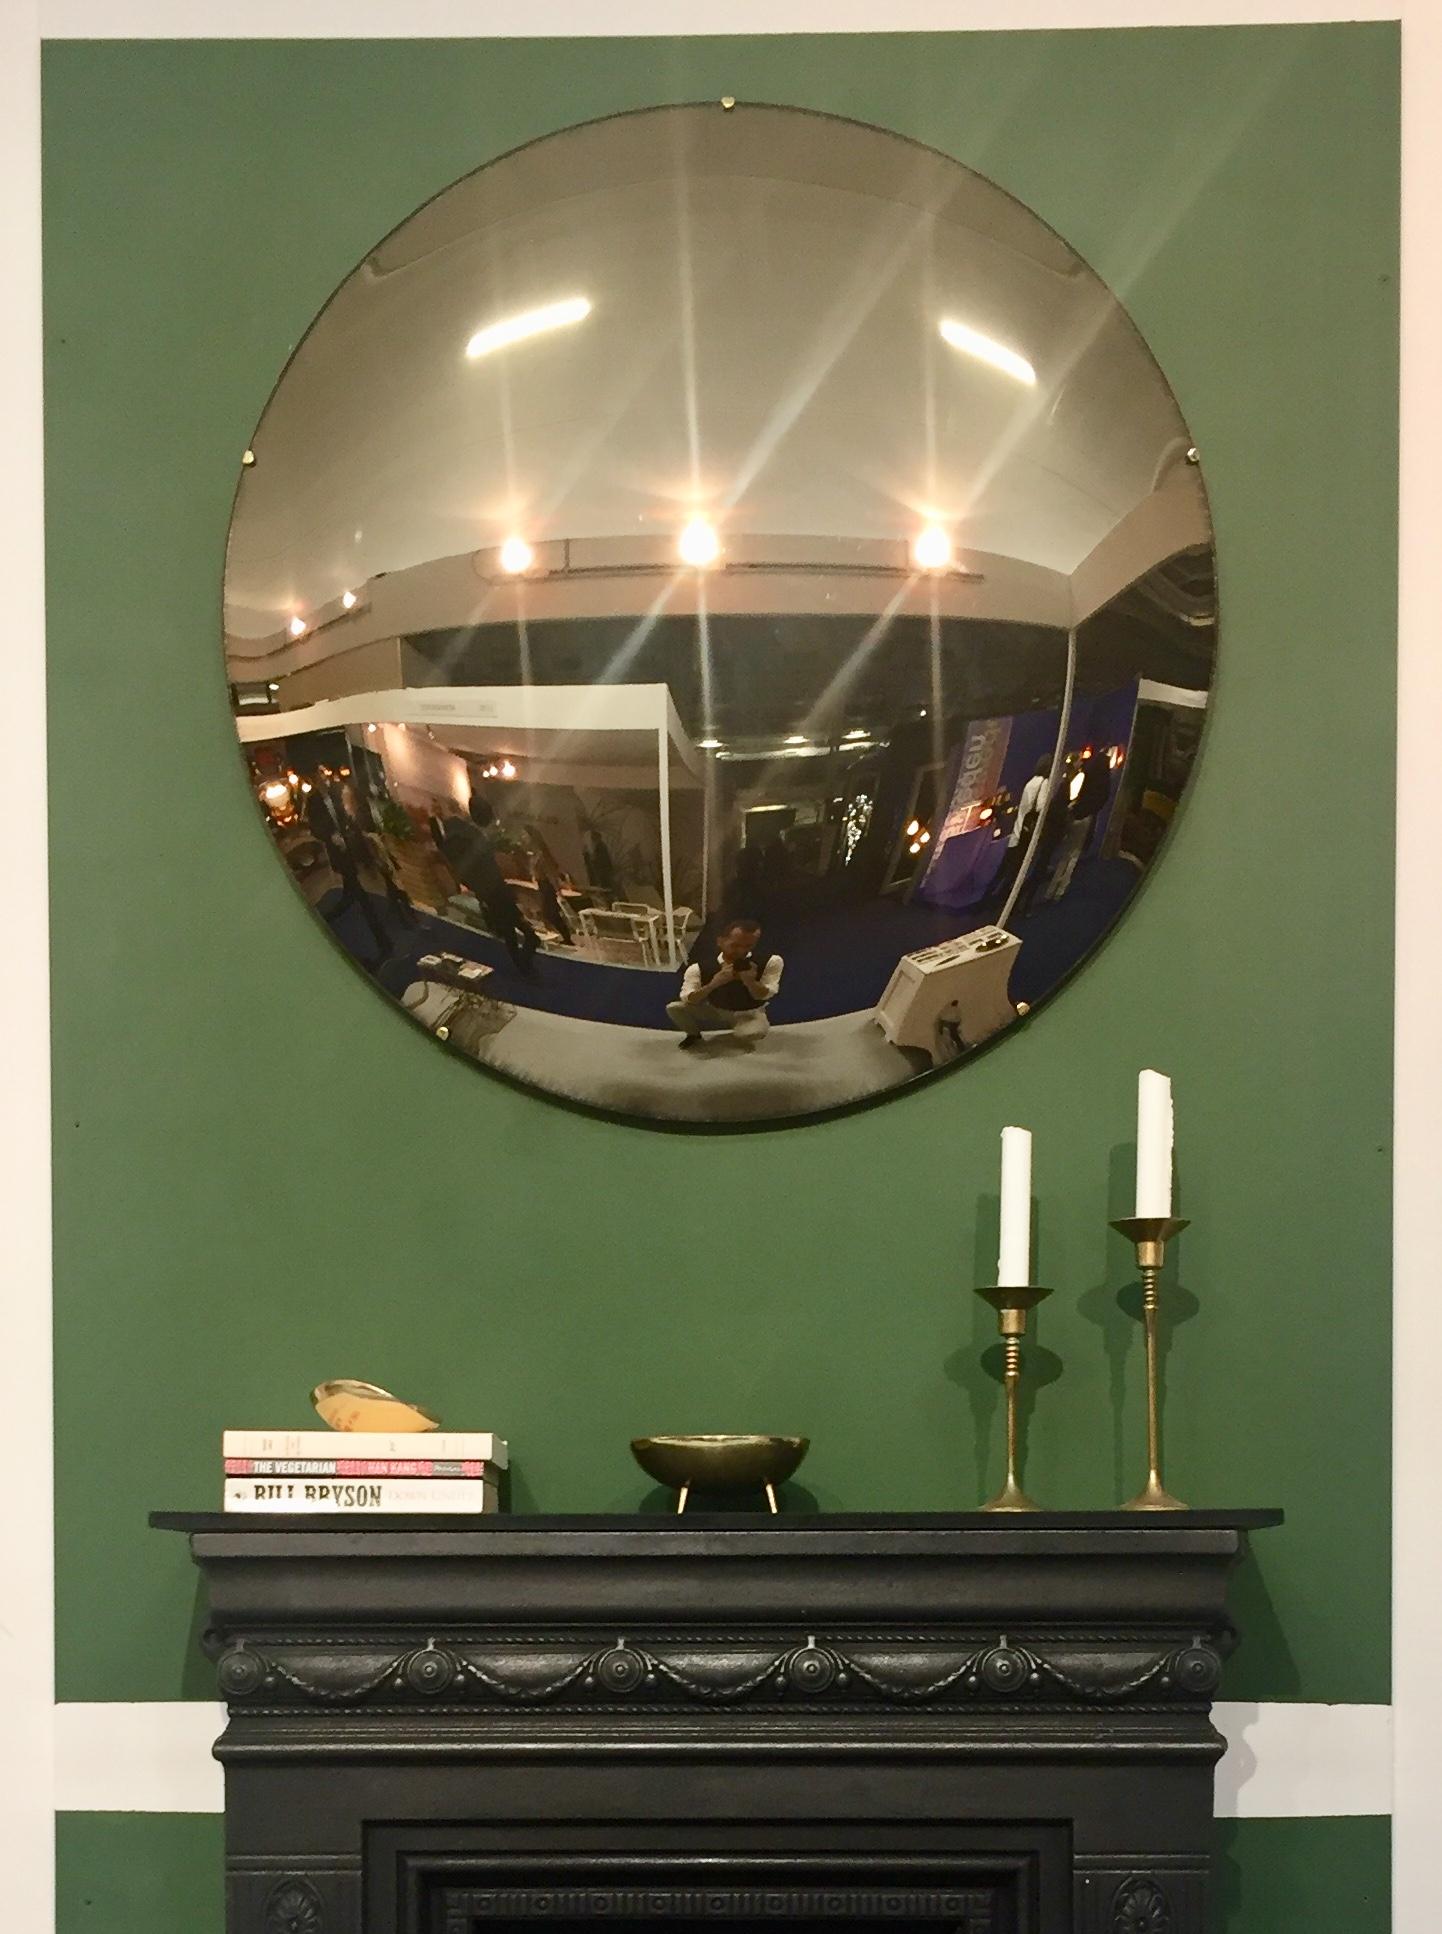 Handcrafted frameless bronze tinted convex mirror.

Each Orbis convex mirror is handcrafted. Slight variations in dimensions, tint and finish are characteristics of such handcrafted work. These characteristics enhance the beauty of the mirrors and